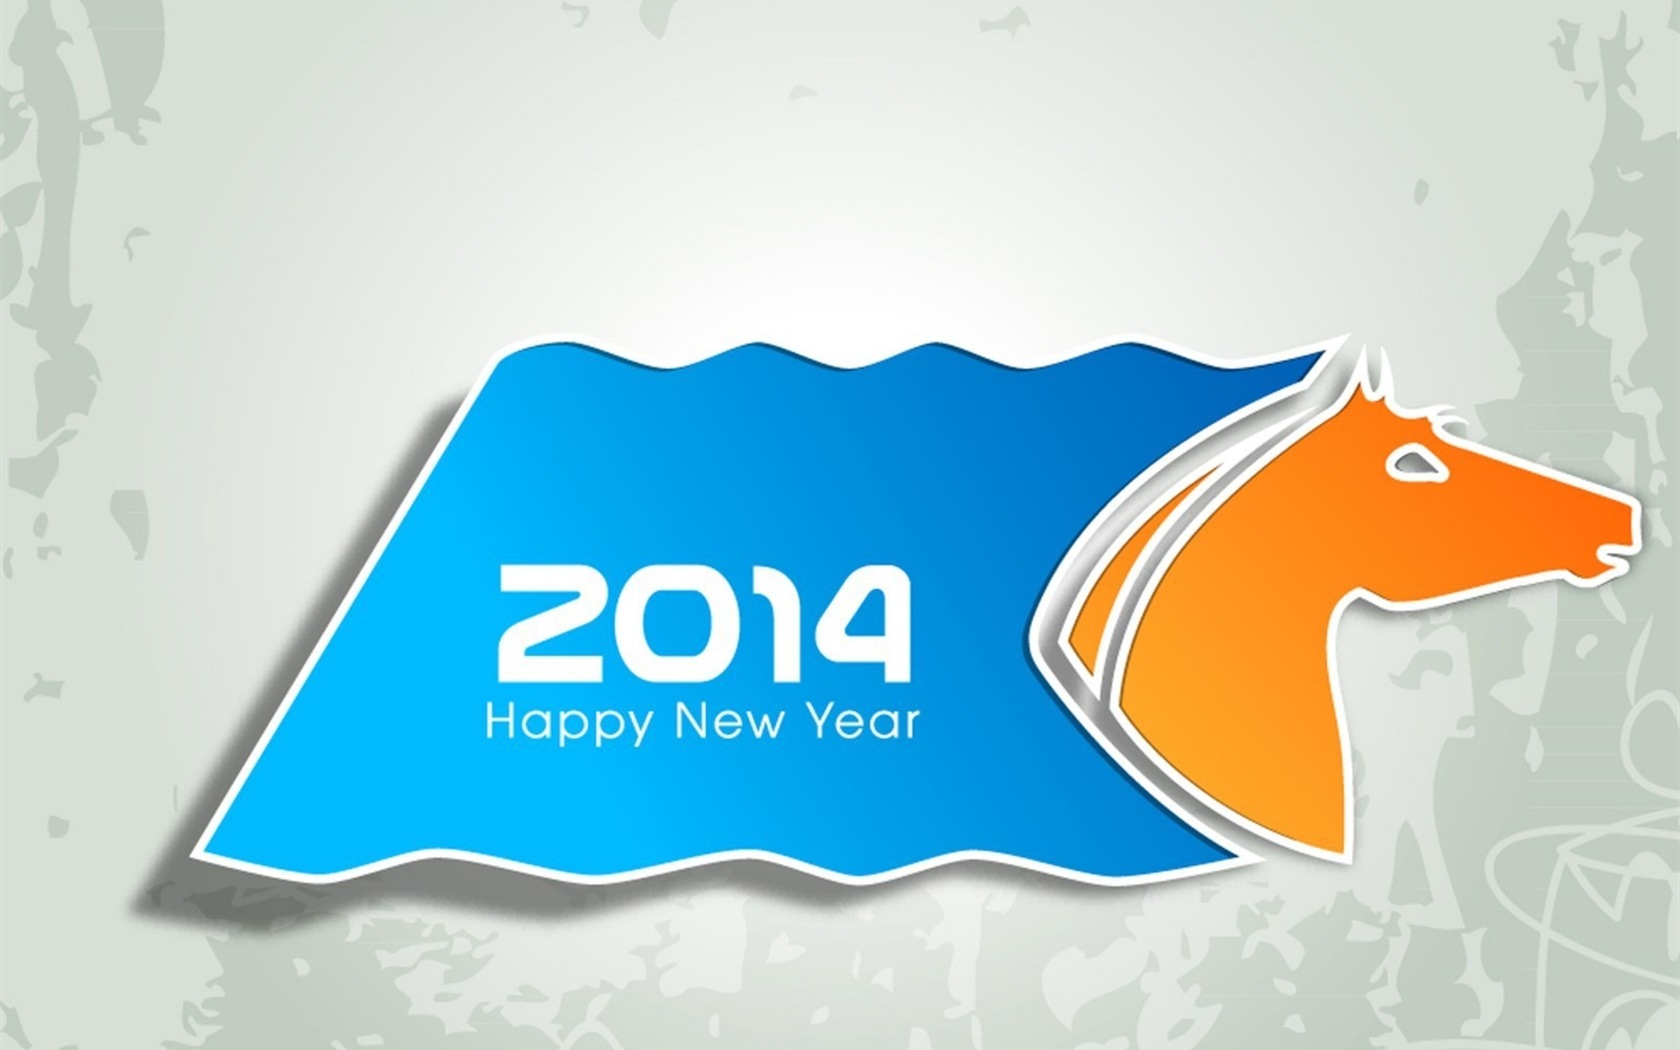 2014 New Year Theme HD Wallpapers (1) #10 - 1680x1050